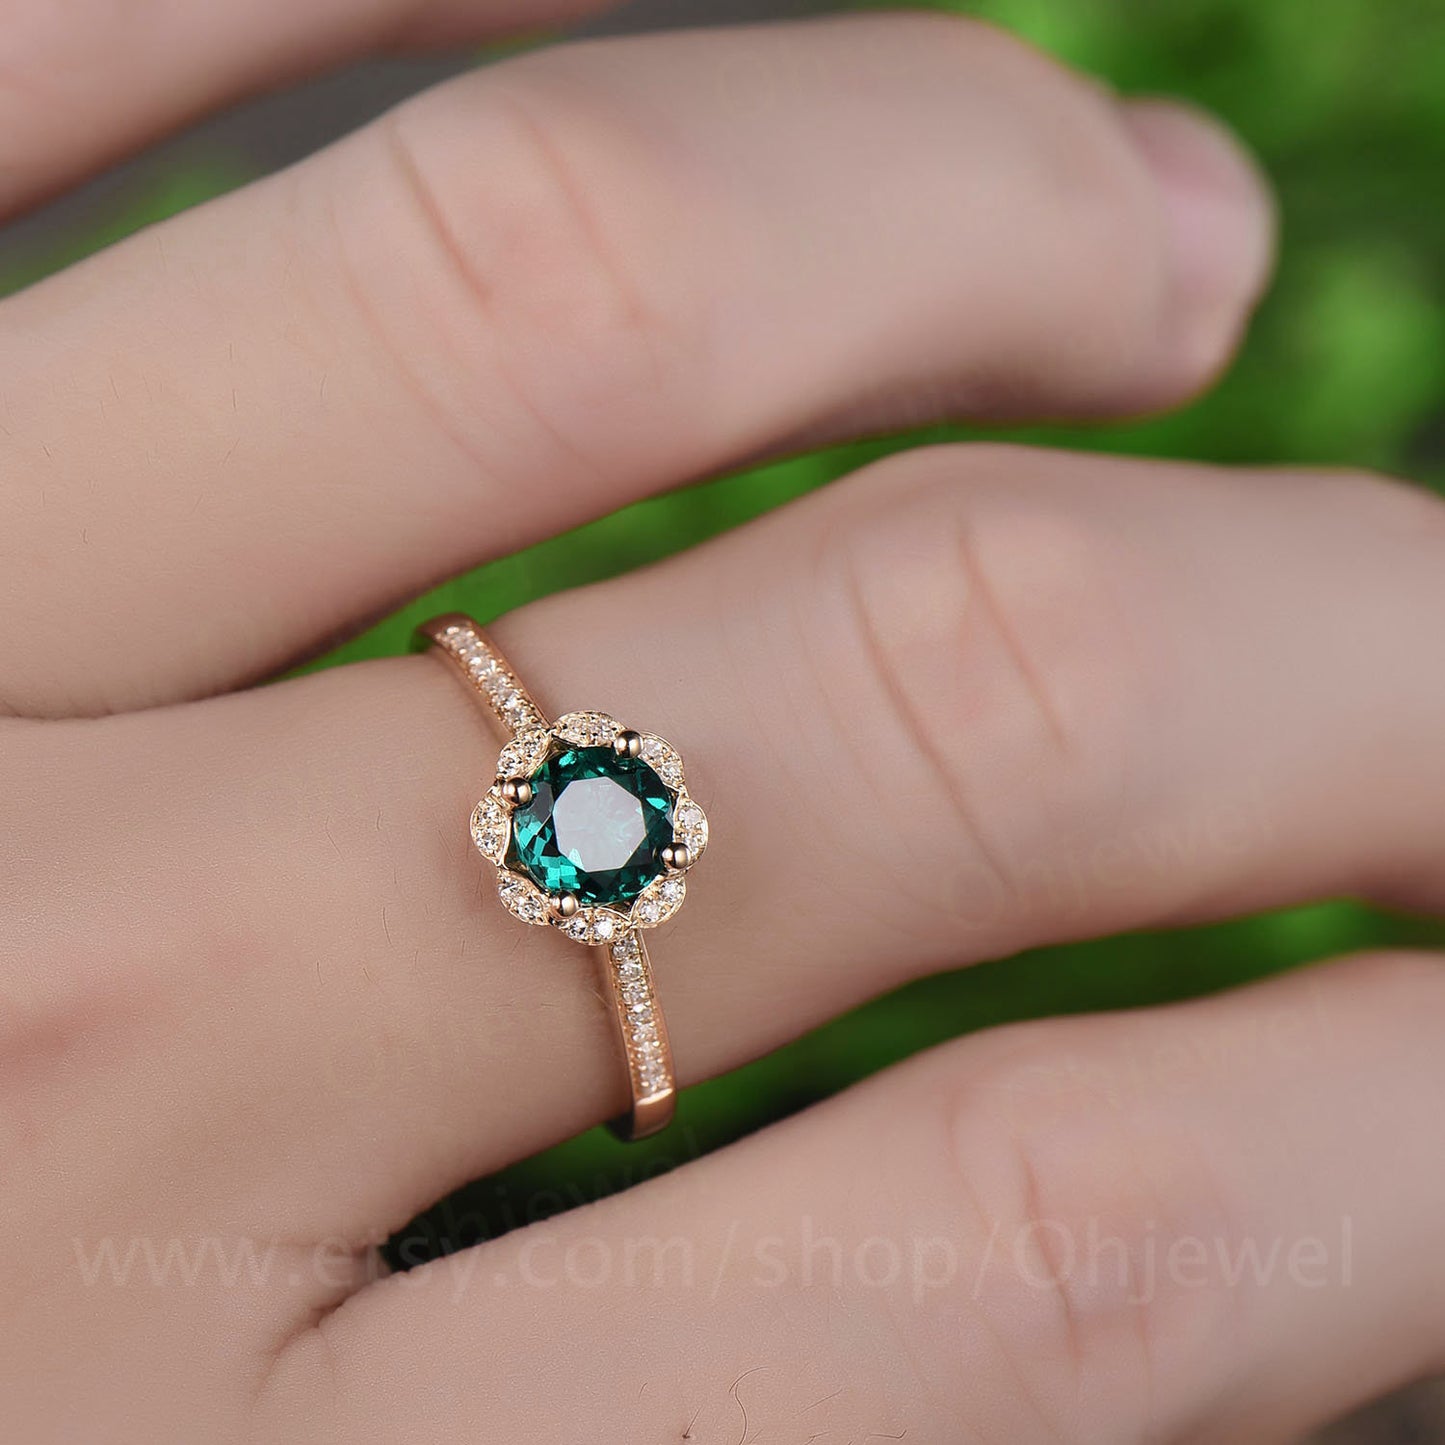 0.6ct flower green emerald engagement ring yellow gold 14K/18K emerald ring gold vintage May birthstone halo diamond wedding ring jewelry